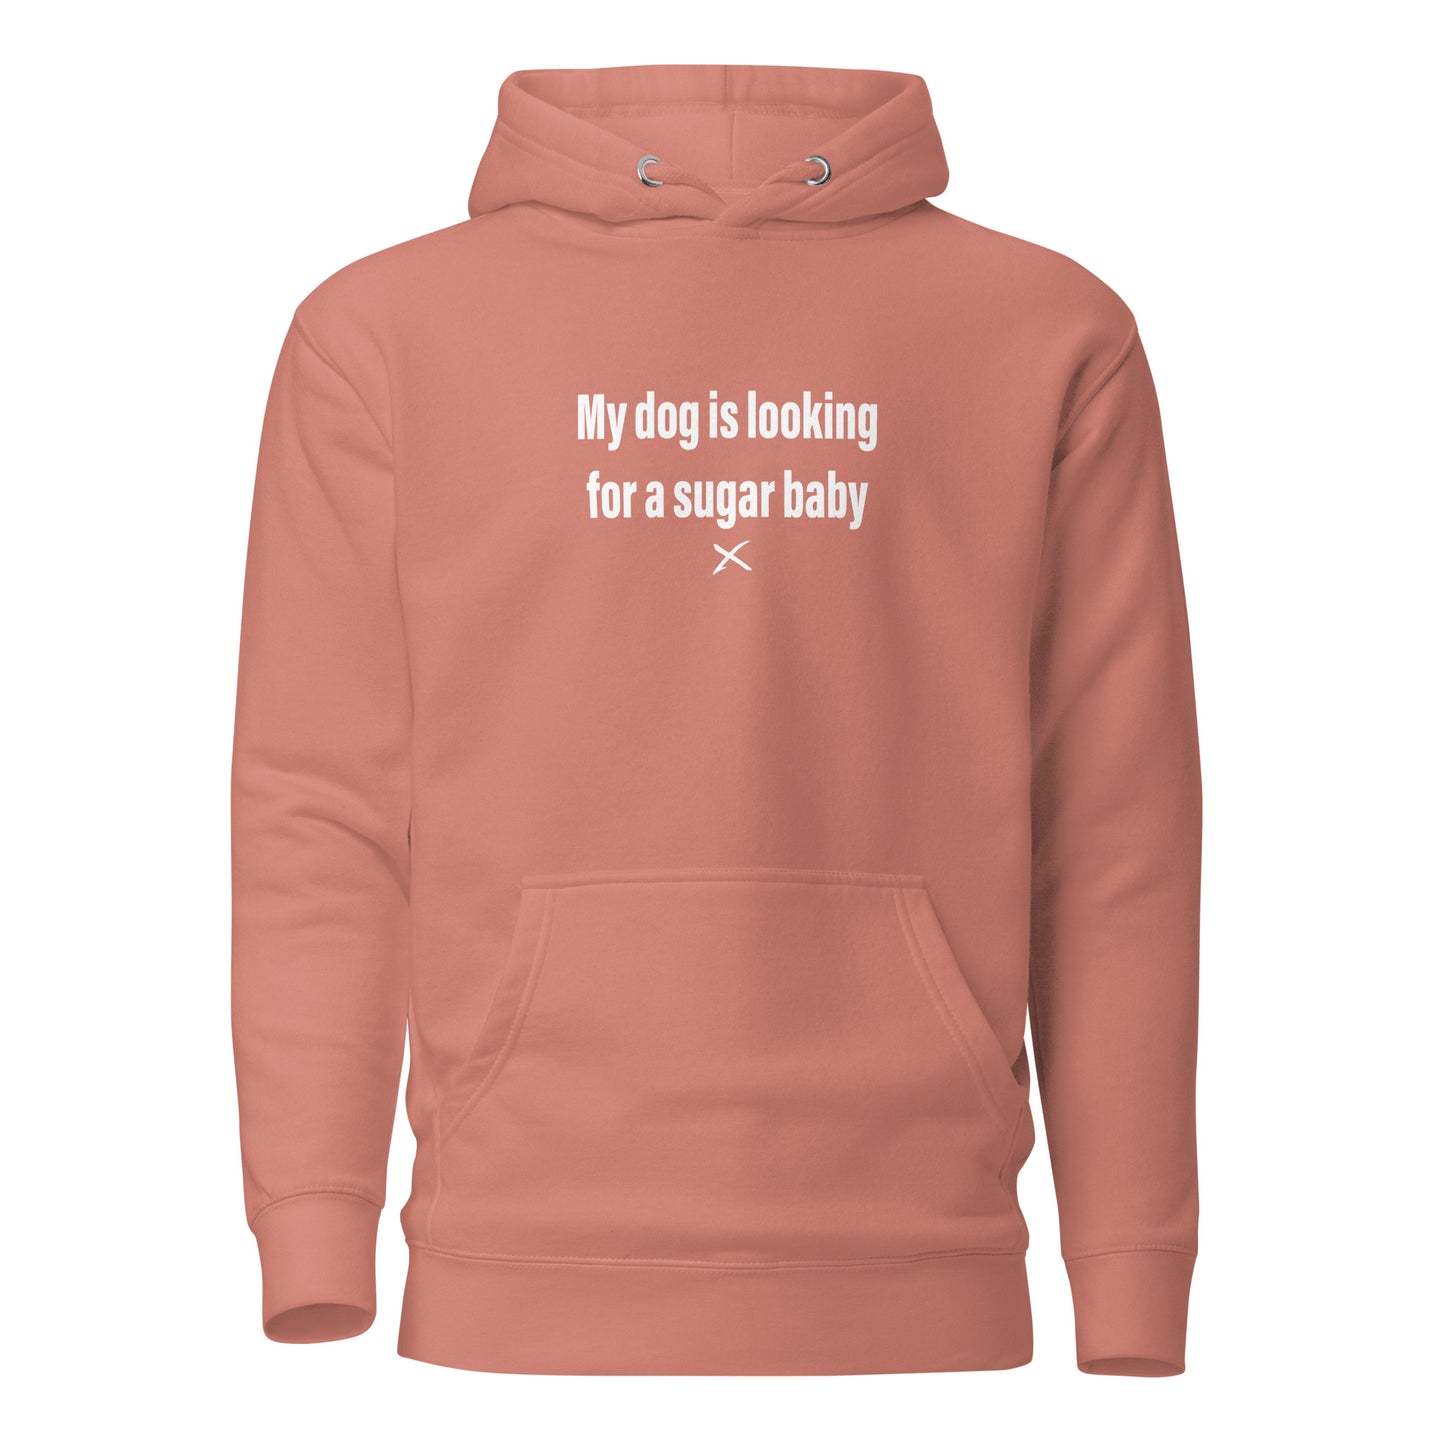 My dog is looking for a sugar baby - Hoodie